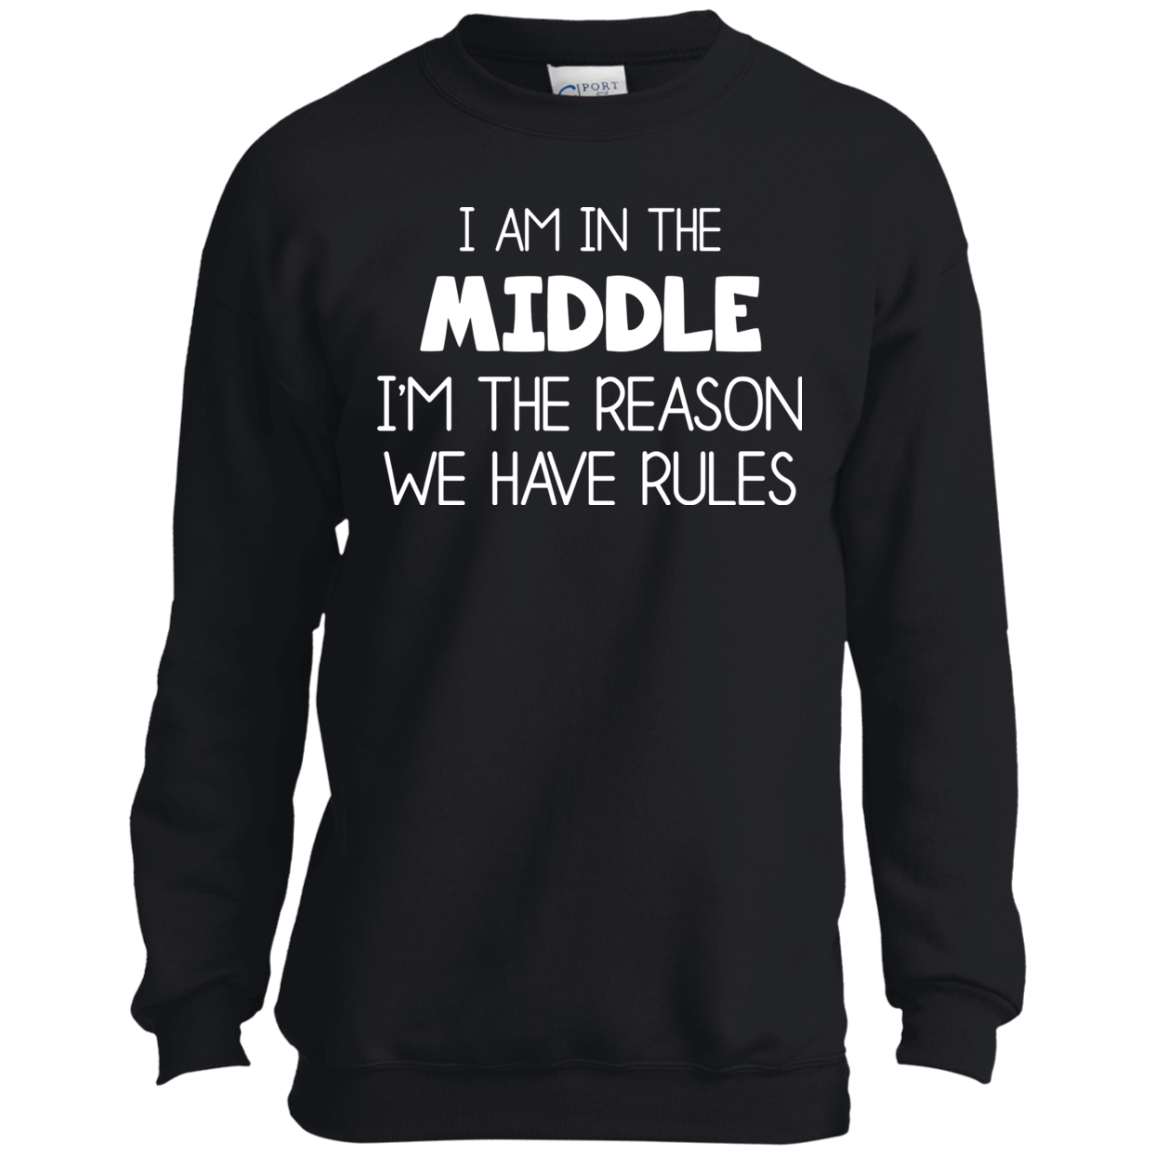 I Am In The Middle – I’m The Reason We Have Rules Youth Tshirt/LS/Sweatshirt/Hoodie